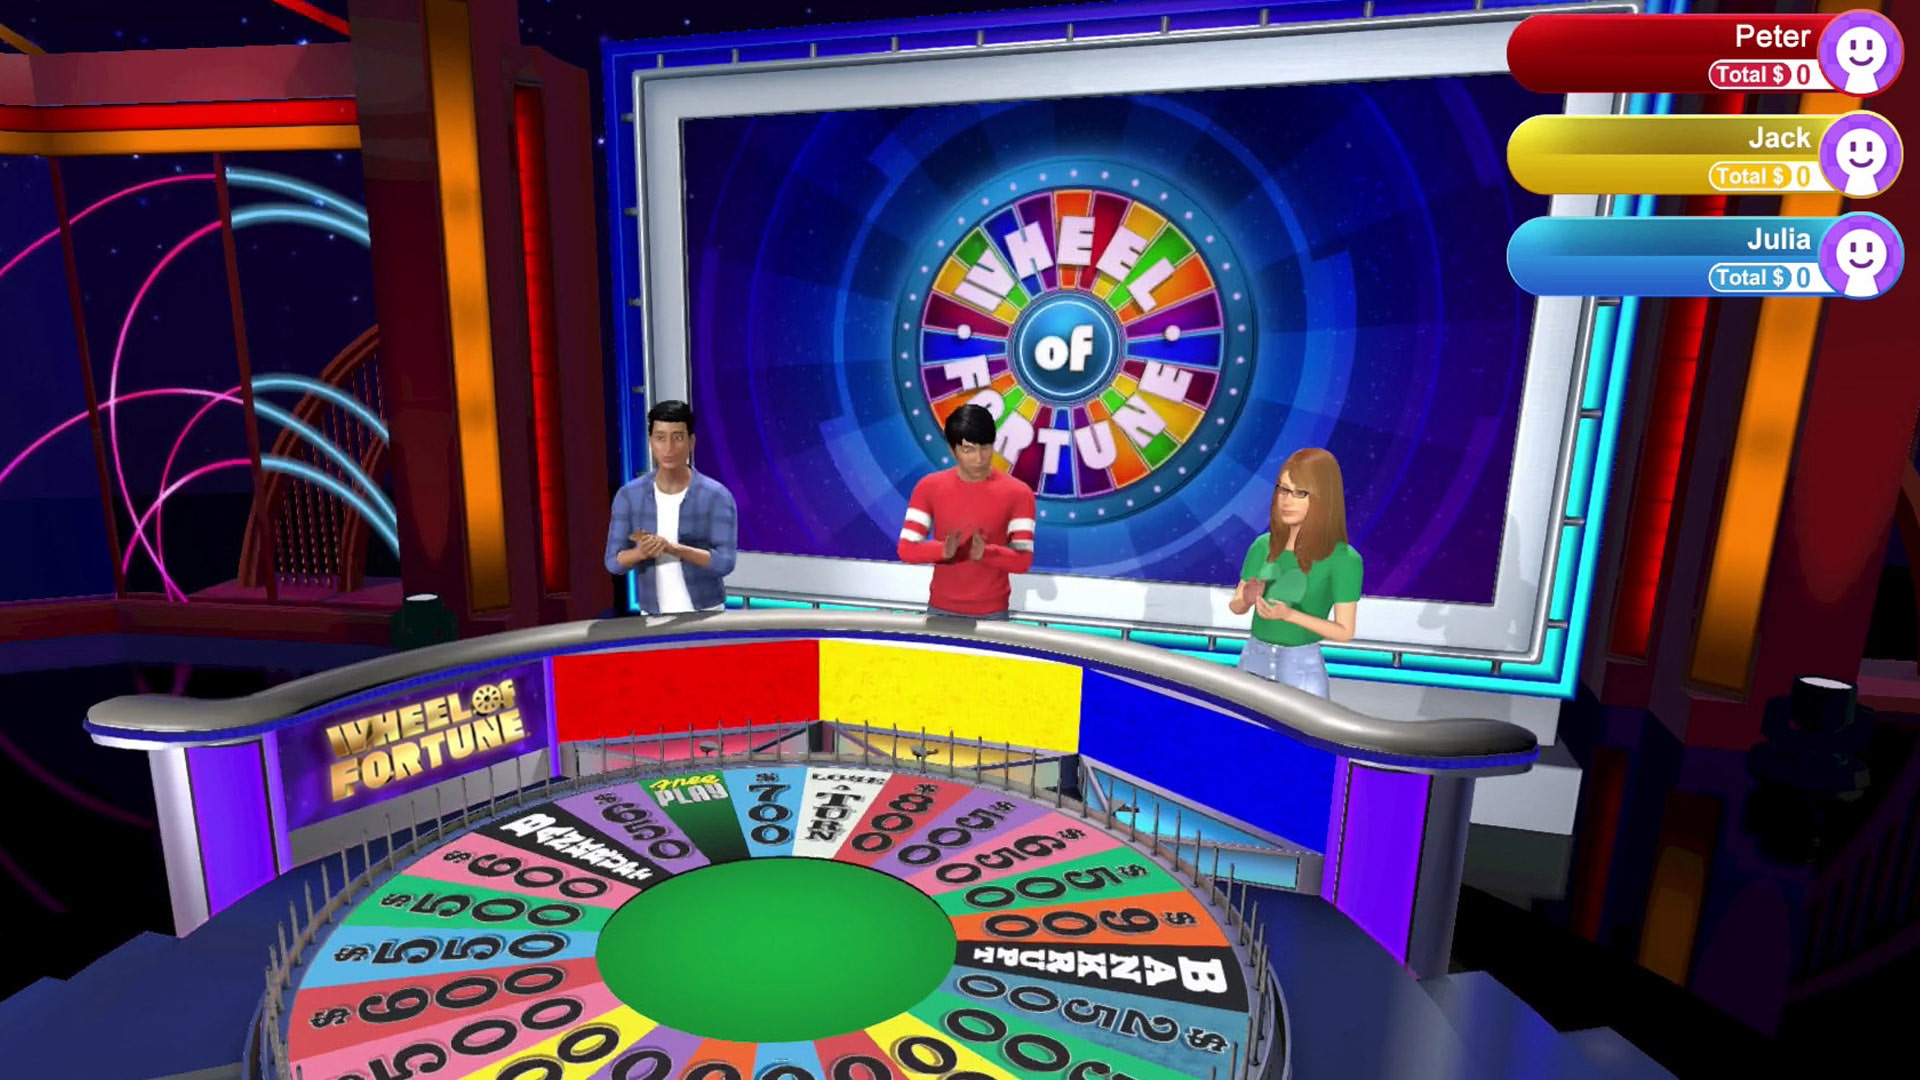 Wheel of fortune игра. Wheel of Fortune станд. America’s Greatest game shows: Wheel of Fortune. Americas Greatest game shows Wheel of Fortune & Jeopardy.